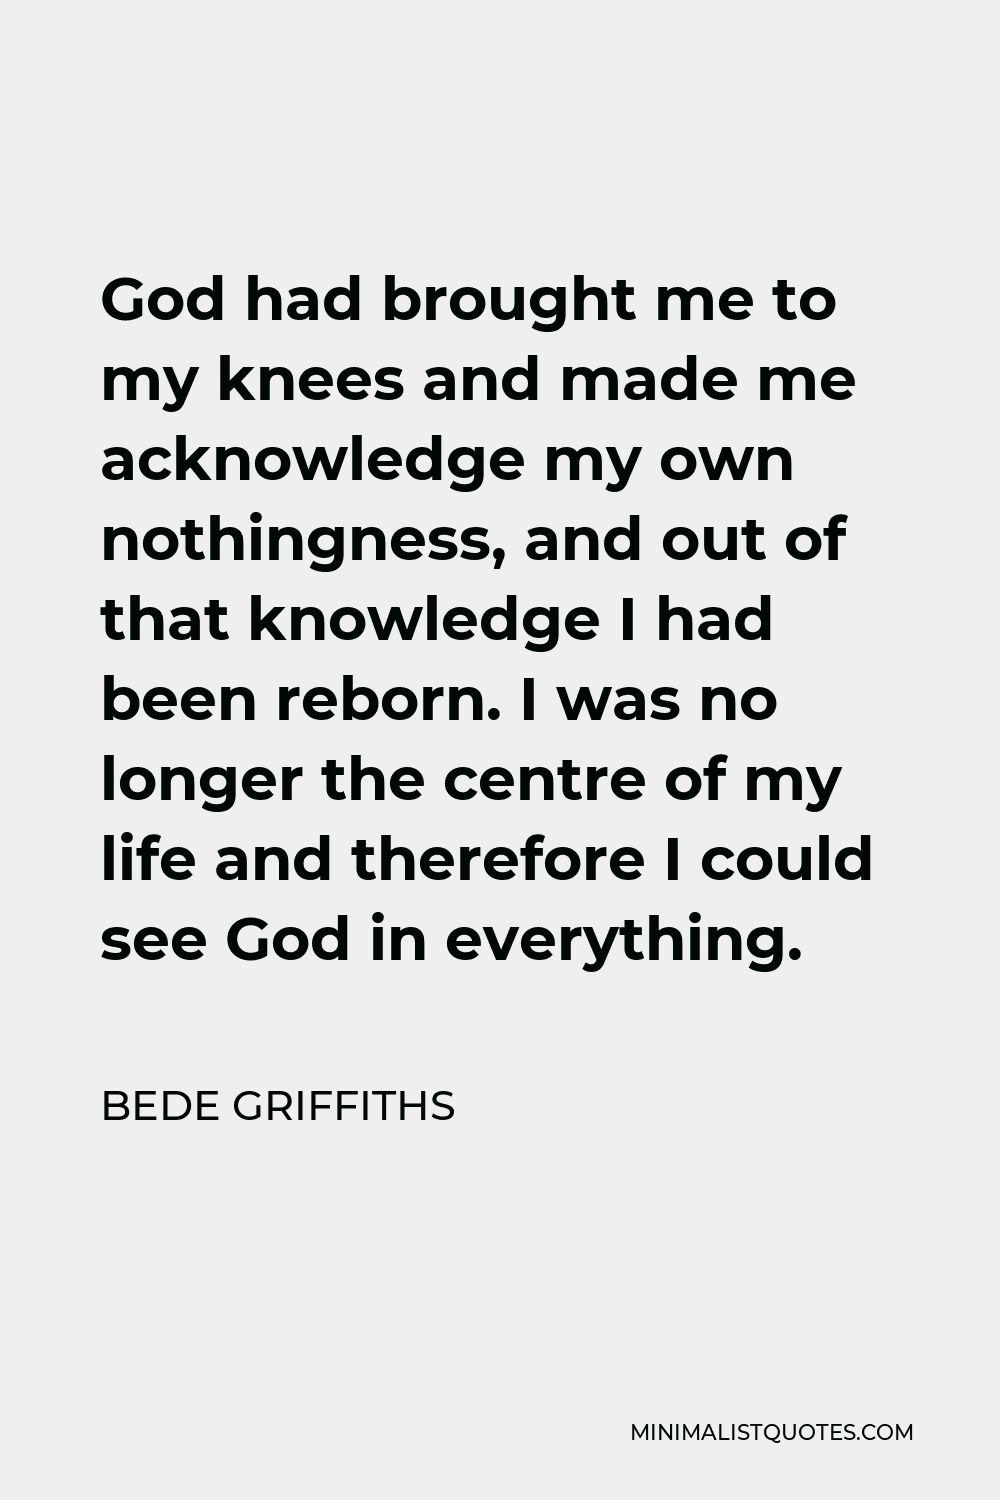 Bede Griffiths Quote - God had brought me to my knees and made me acknowledge my own nothingness, and out of that knowledge I had been reborn. I was no longer the centre of my life and therefore I could see God in everything.